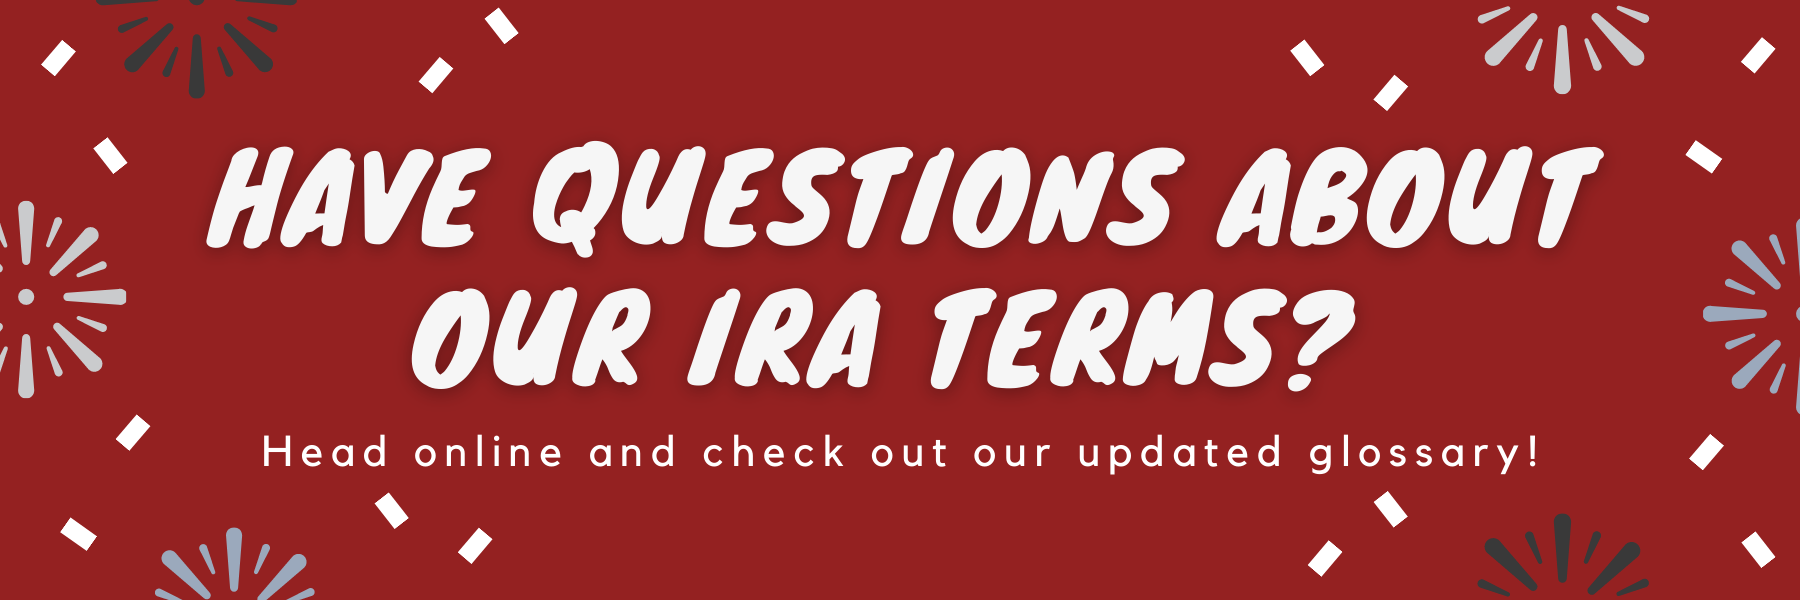 Have Questions About Our IRA Terms? - Glossary